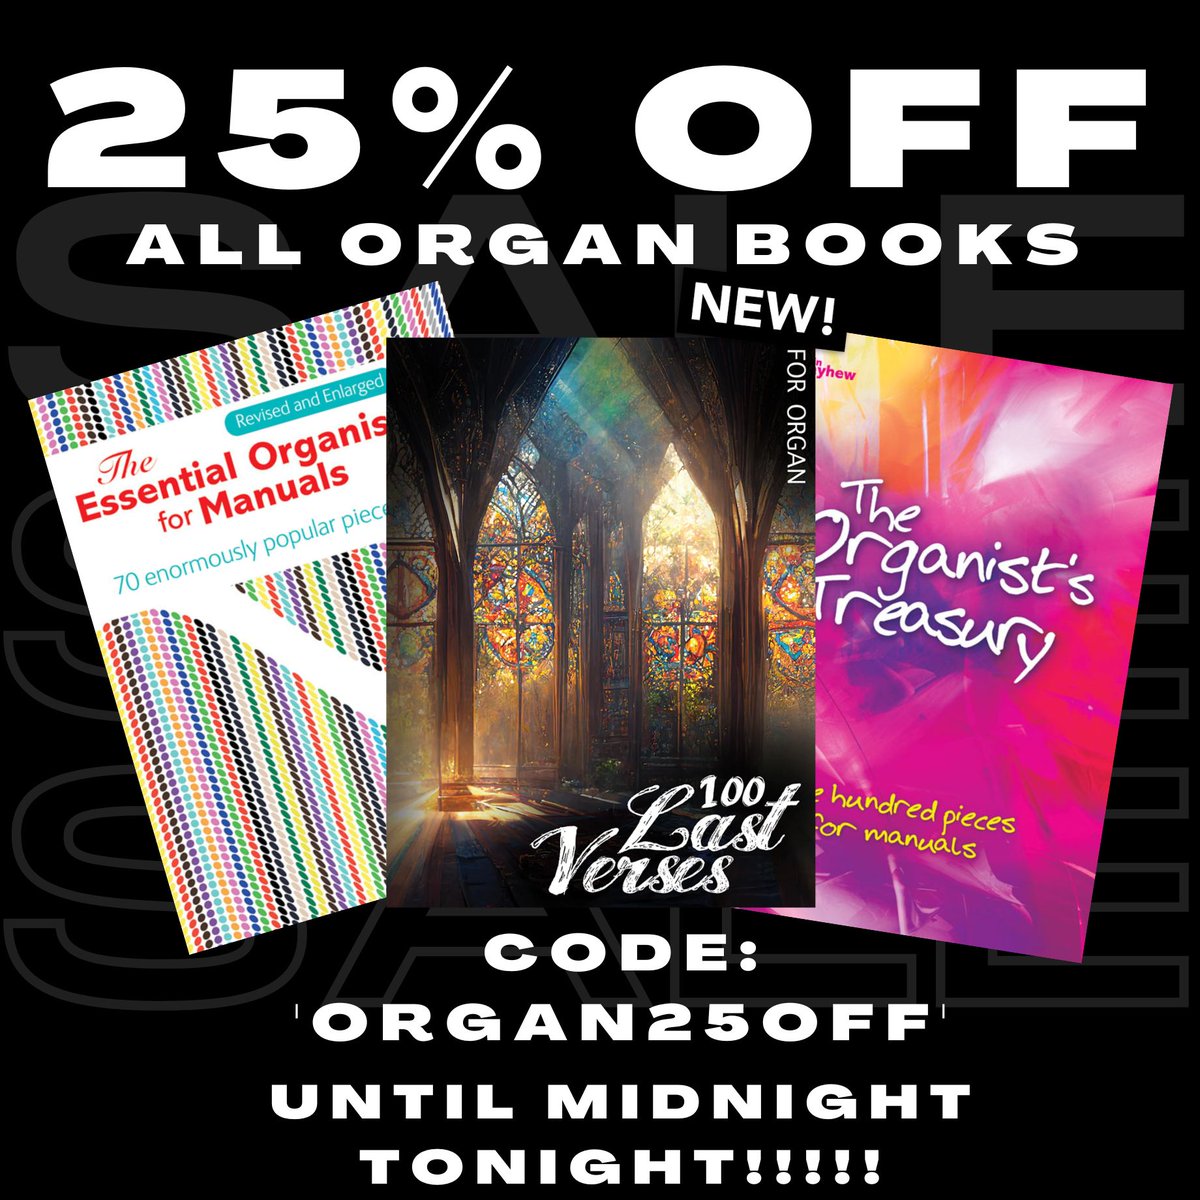 Last day to get 25% OFF all Organ books!! Offer ends tonight!! 
Use Code: OGRAN25OFF 
kevinmayhew.com/collections/or…
#organmusic #organ #bestoforgan #kevinmayhew #kevinmayhewltd #kevinmayhewpublishing